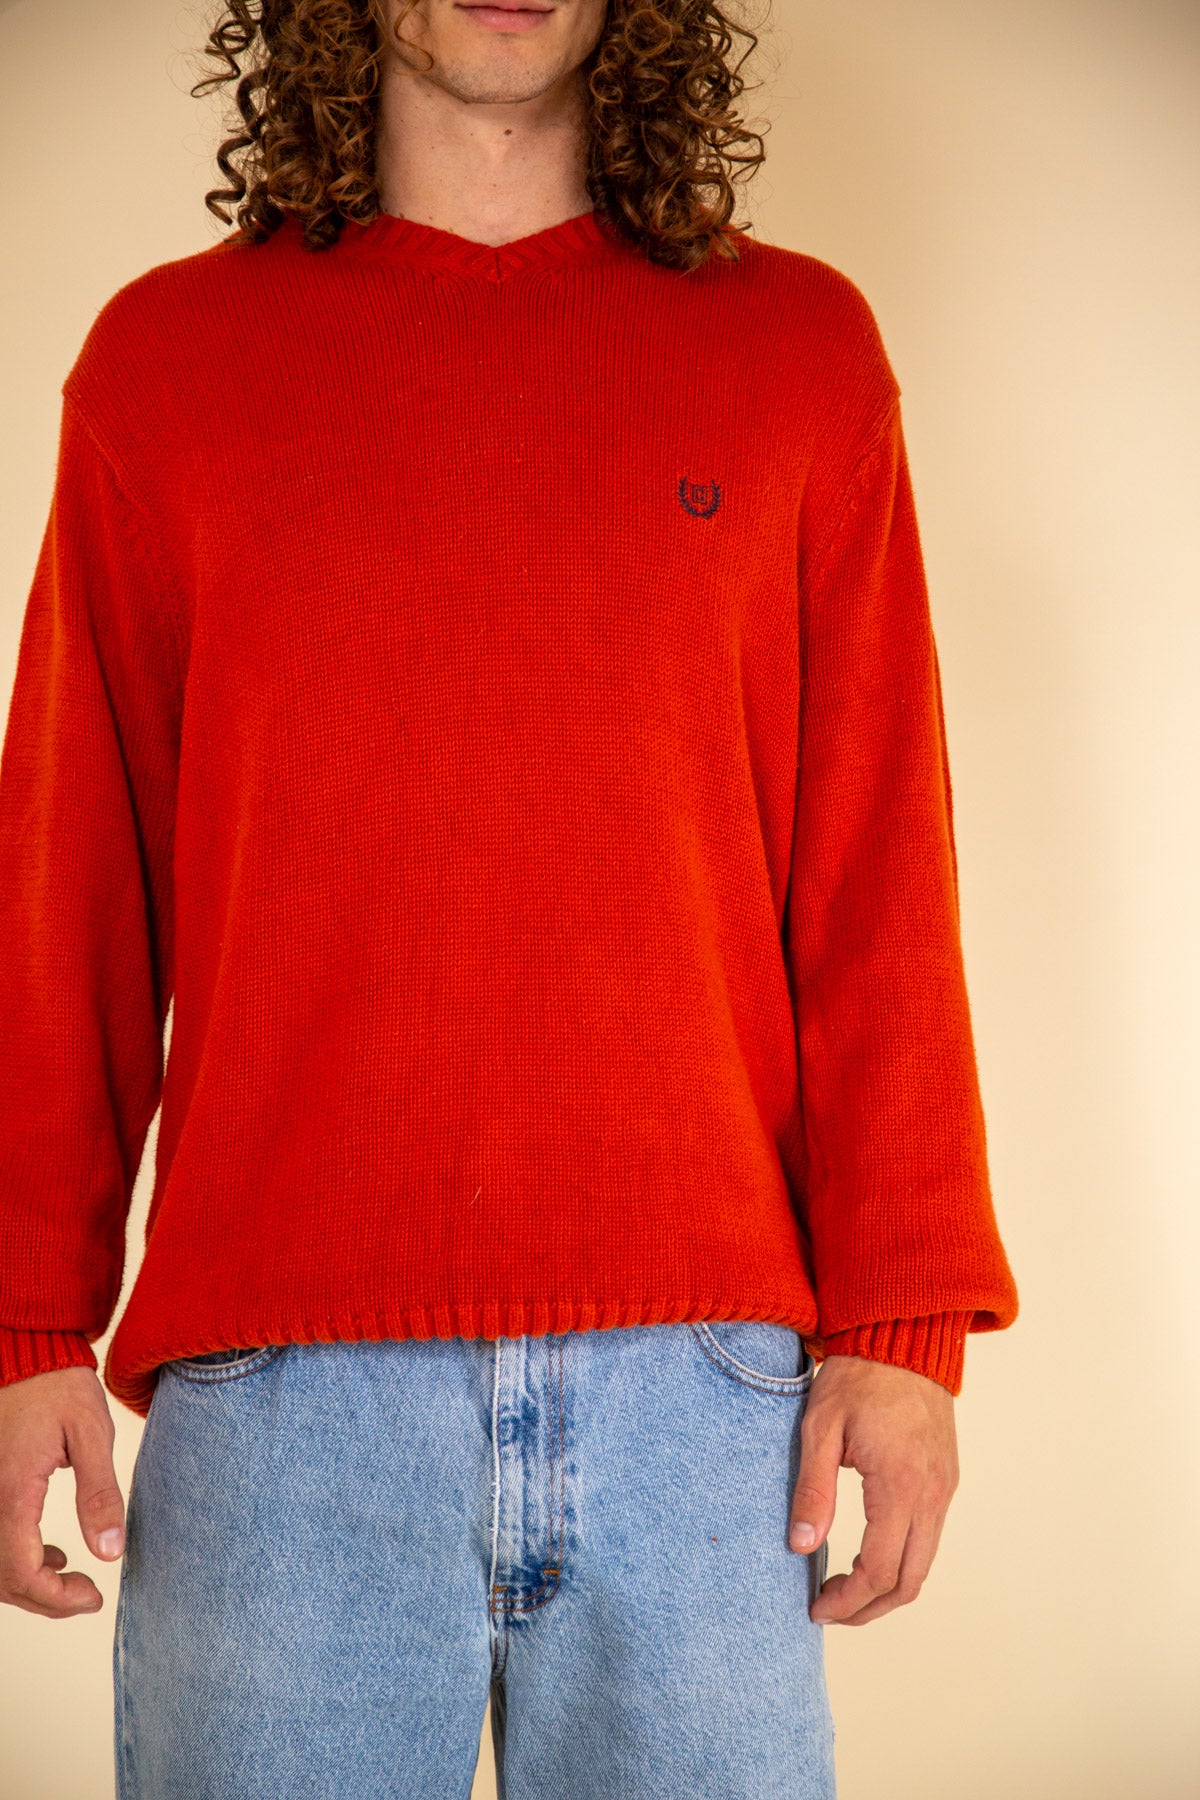 Chaps Knitted Sweater